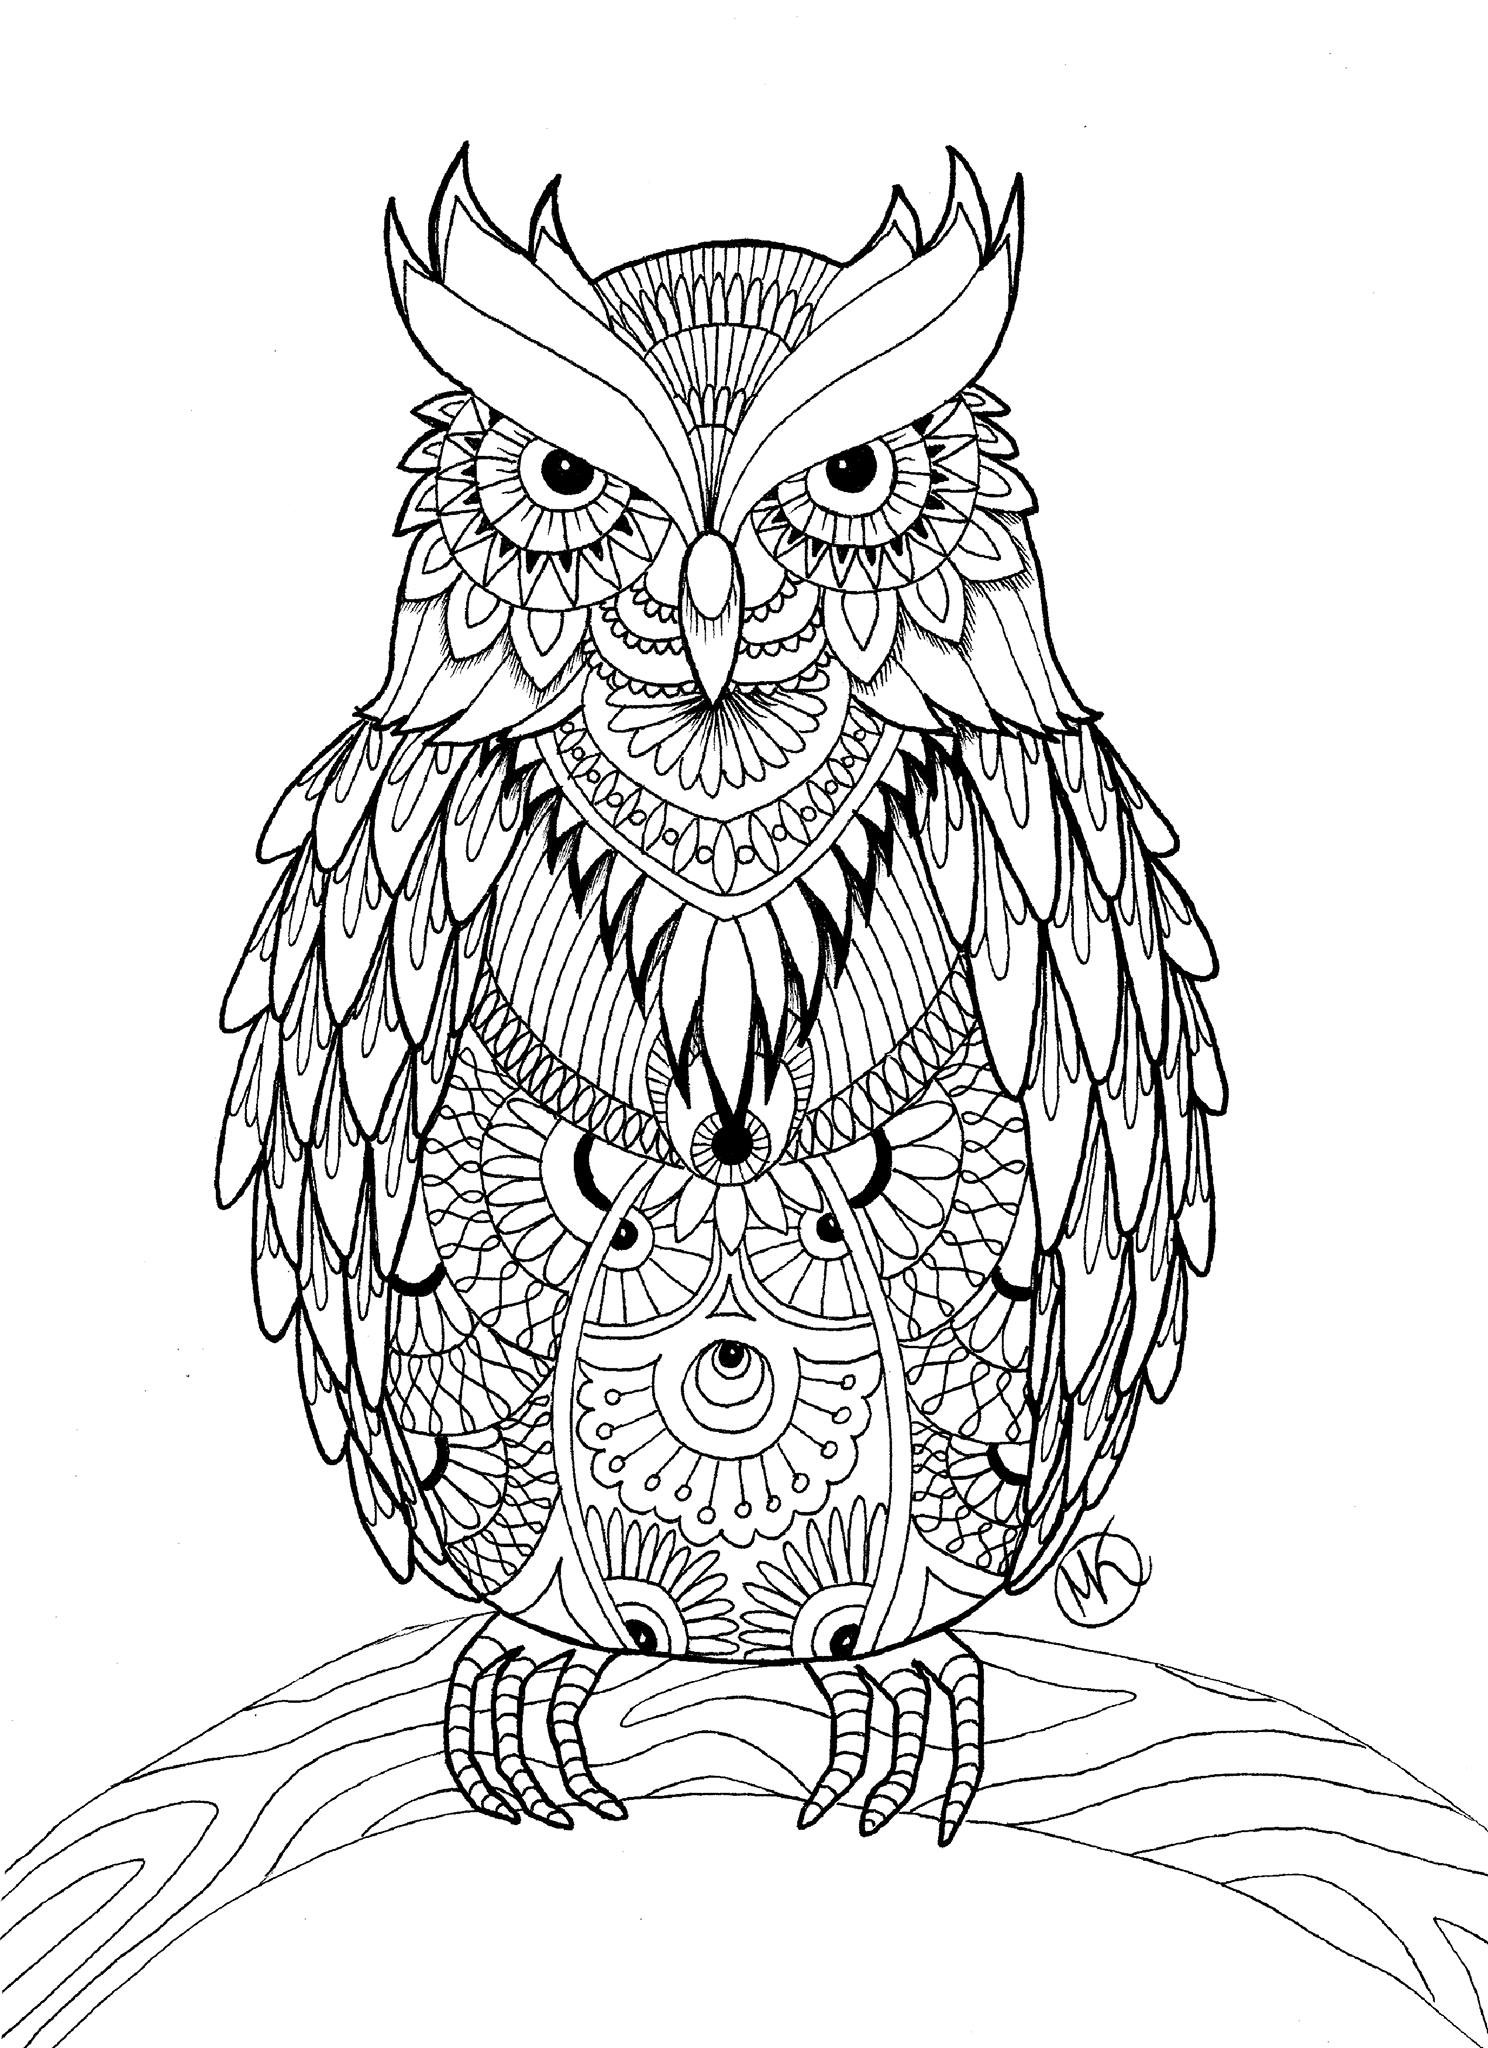 Coloring Sheets For Adults Printable
 OWL Coloring Pages for Adults Free Detailed Owl Coloring